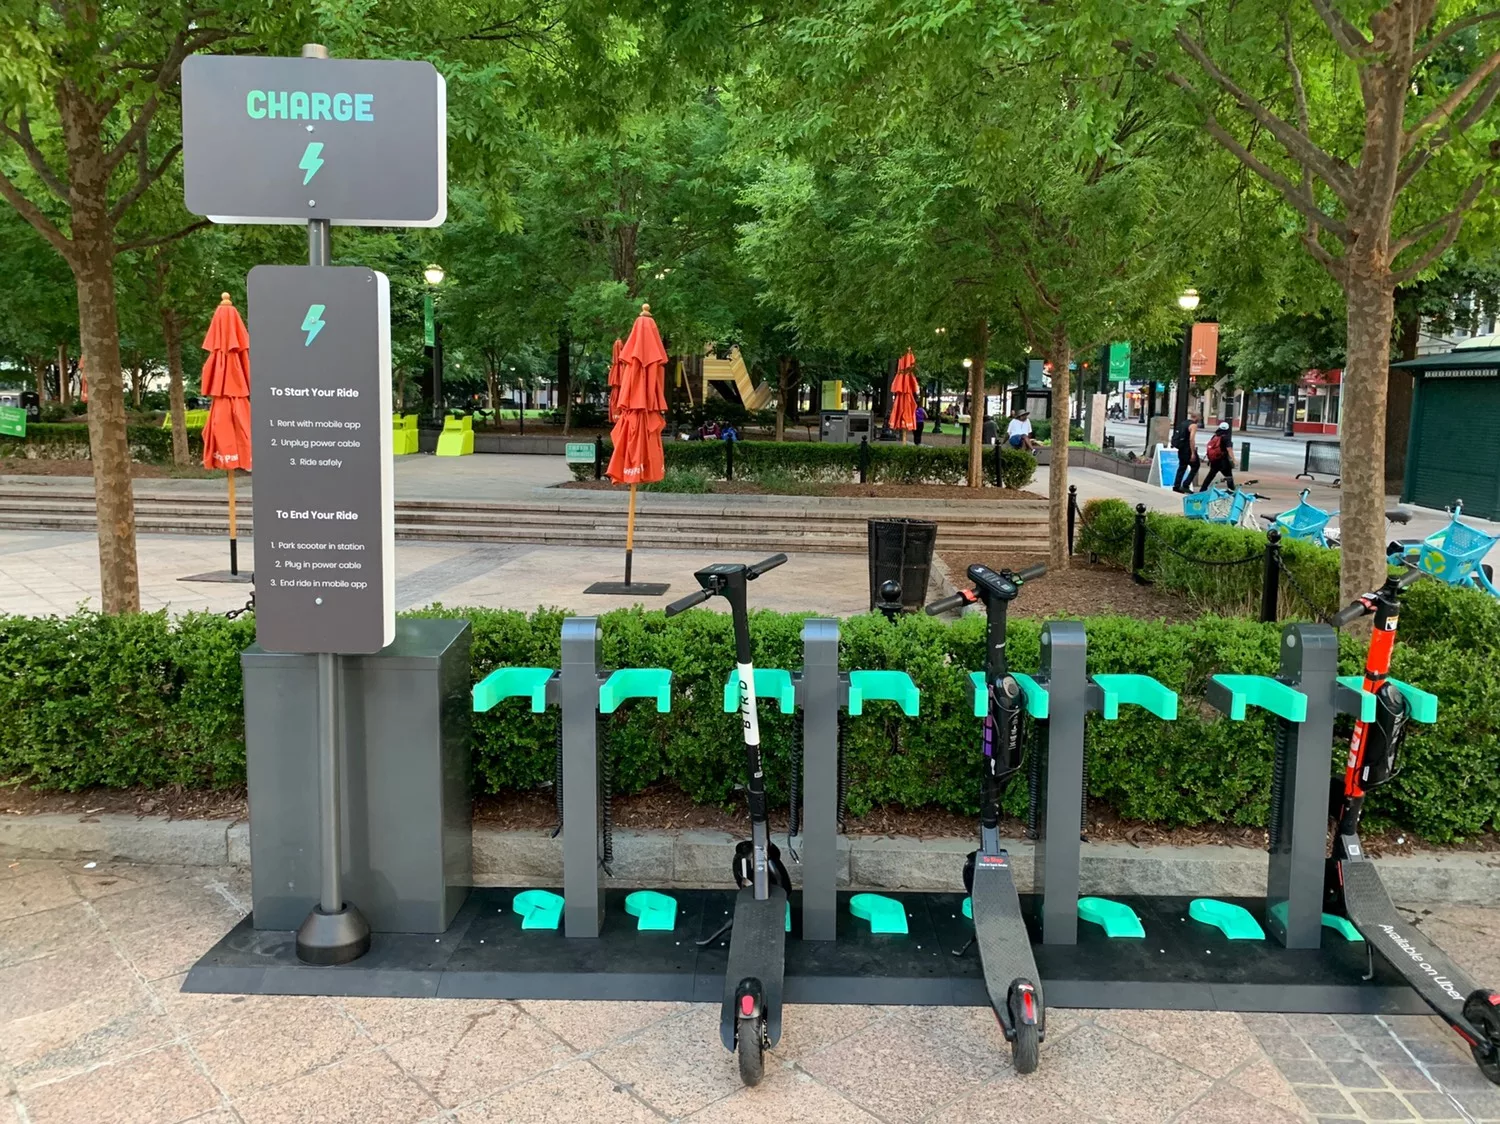 Electric scooter charging station with instructions sign in urban park setting